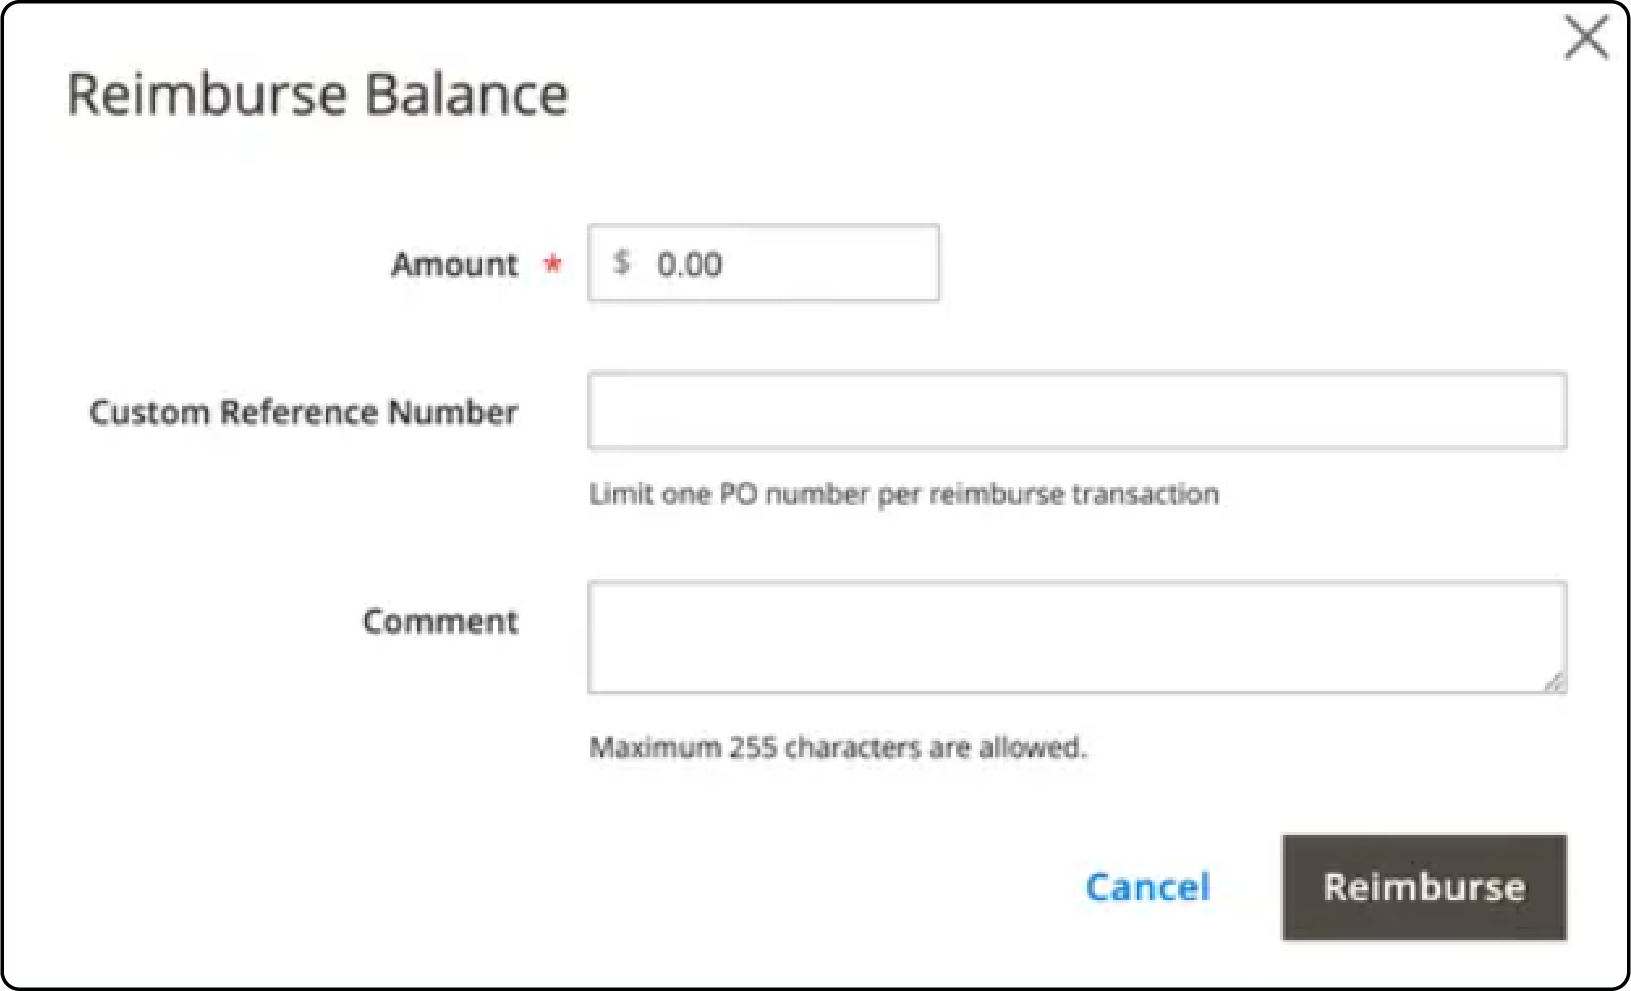 Edit a Reimbursement-Make any necessary changes to the Custom Reference Number and Comment fields and save changes